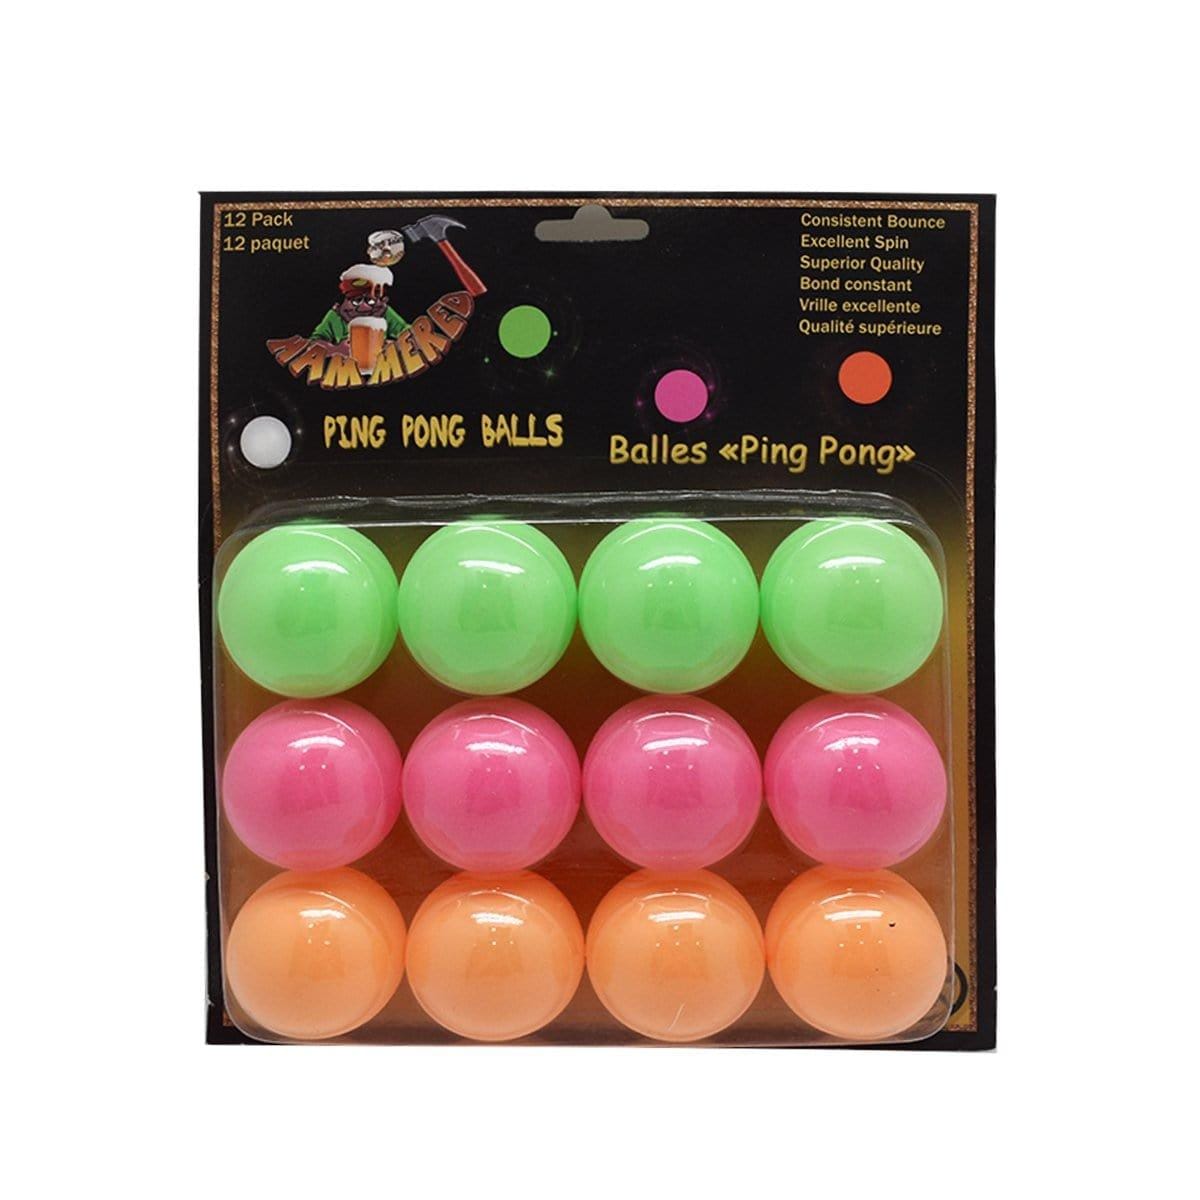 Buy Theme Party Neon Ping Pong Balls, 12 per Package sold at Party Expert